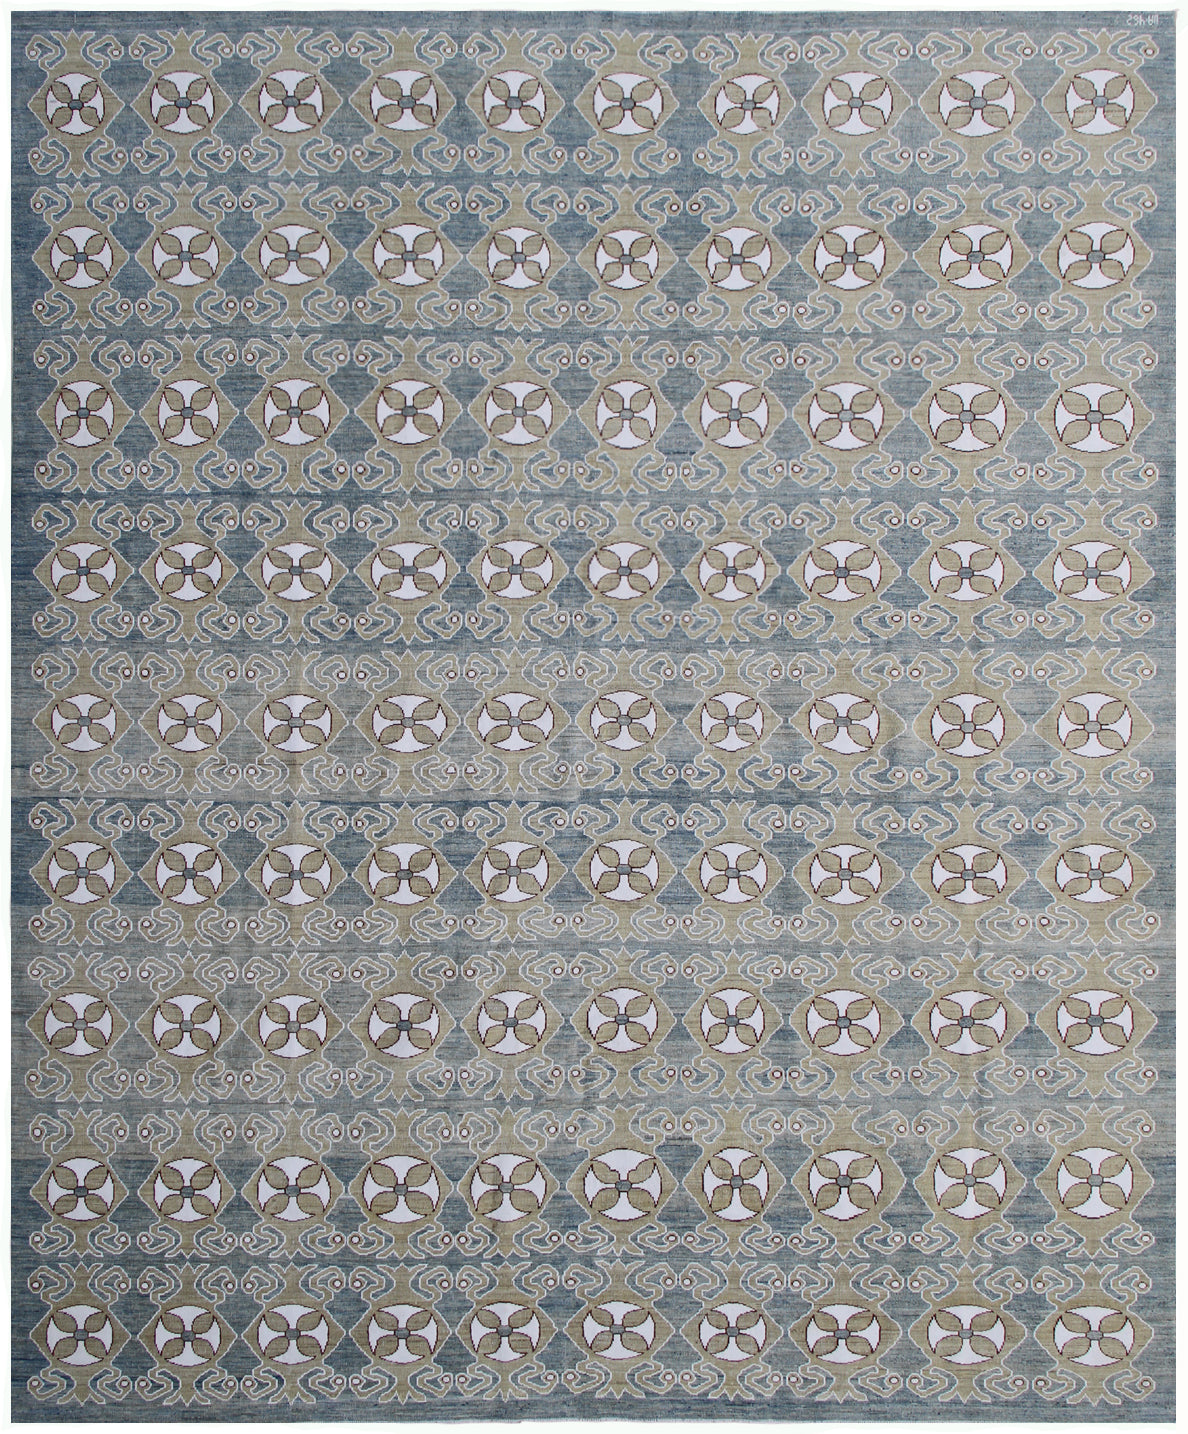 10'x8'Blue and White Contemporary Wool and Cotton Ariana Transitional Area Rug